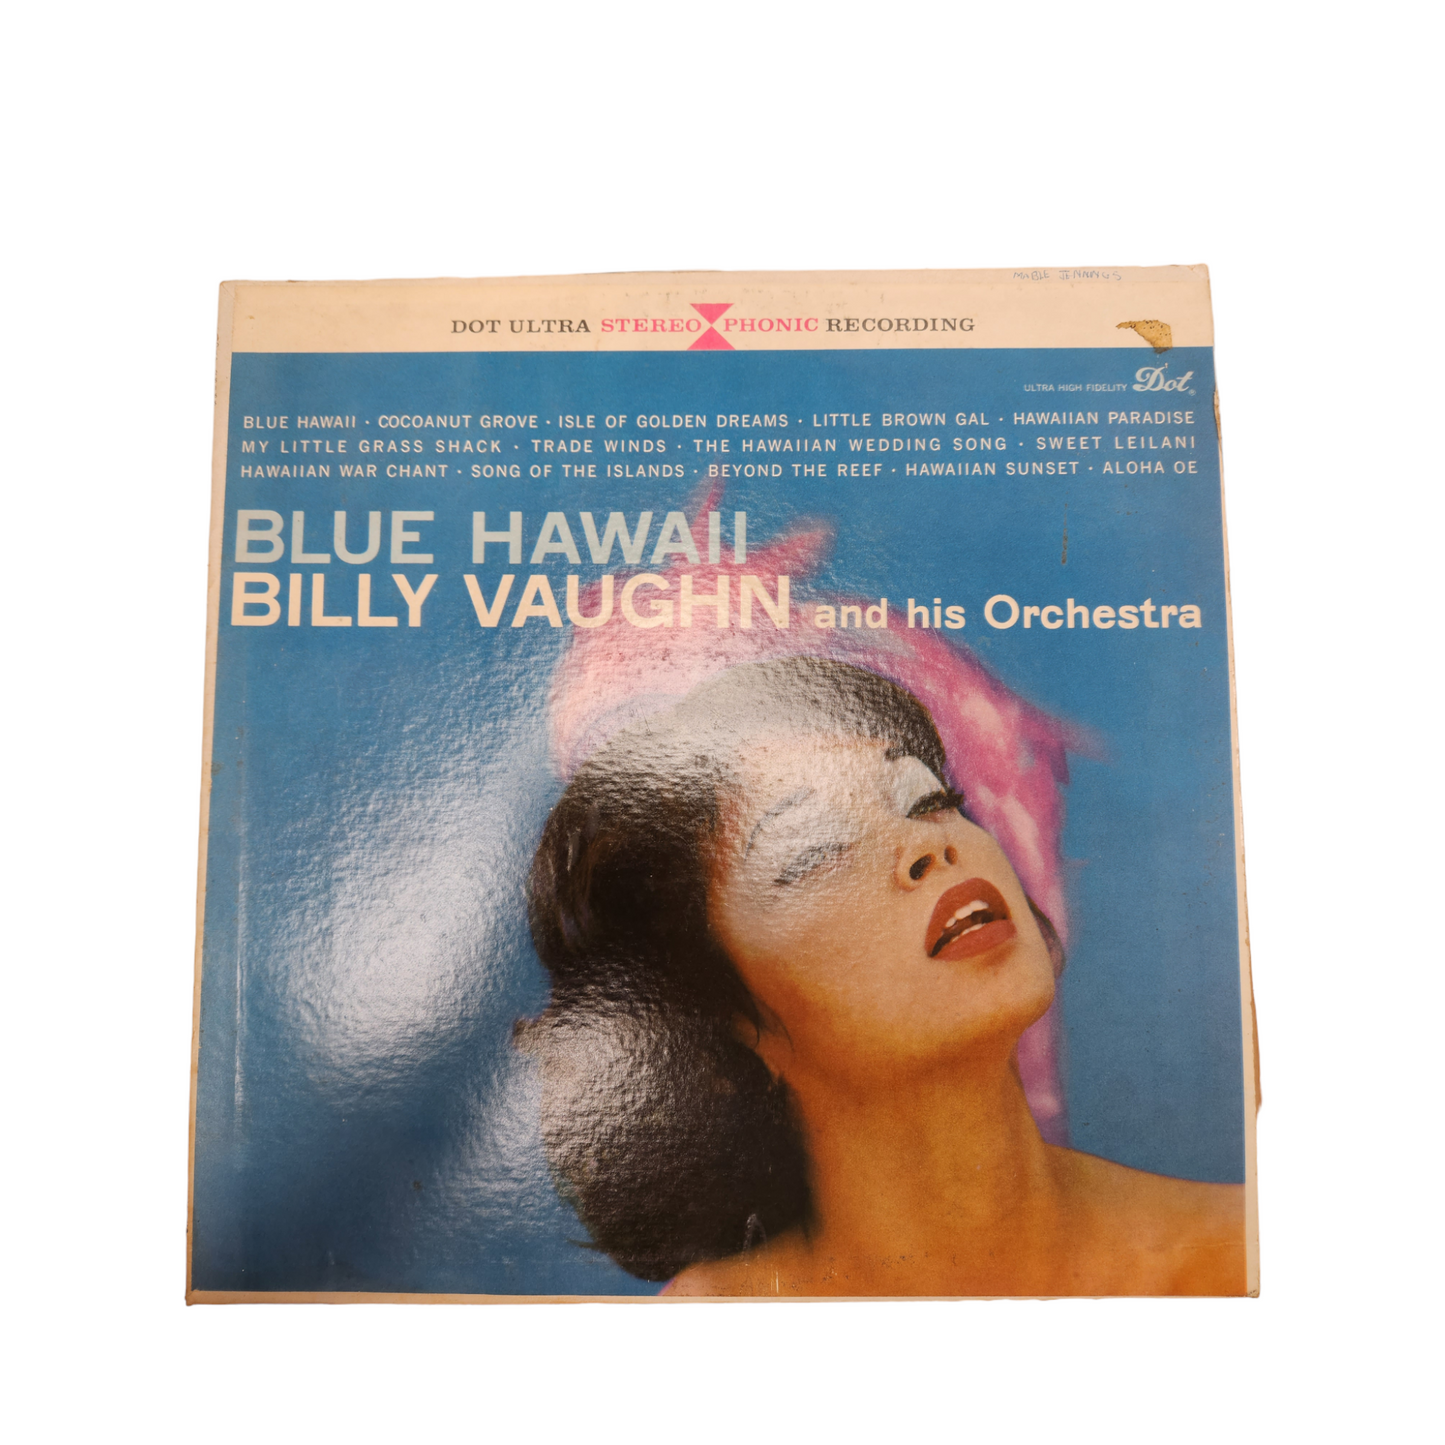 Billy Vaughn and His Orchestra "Blue Hawaii" Vintage Vinyl Record